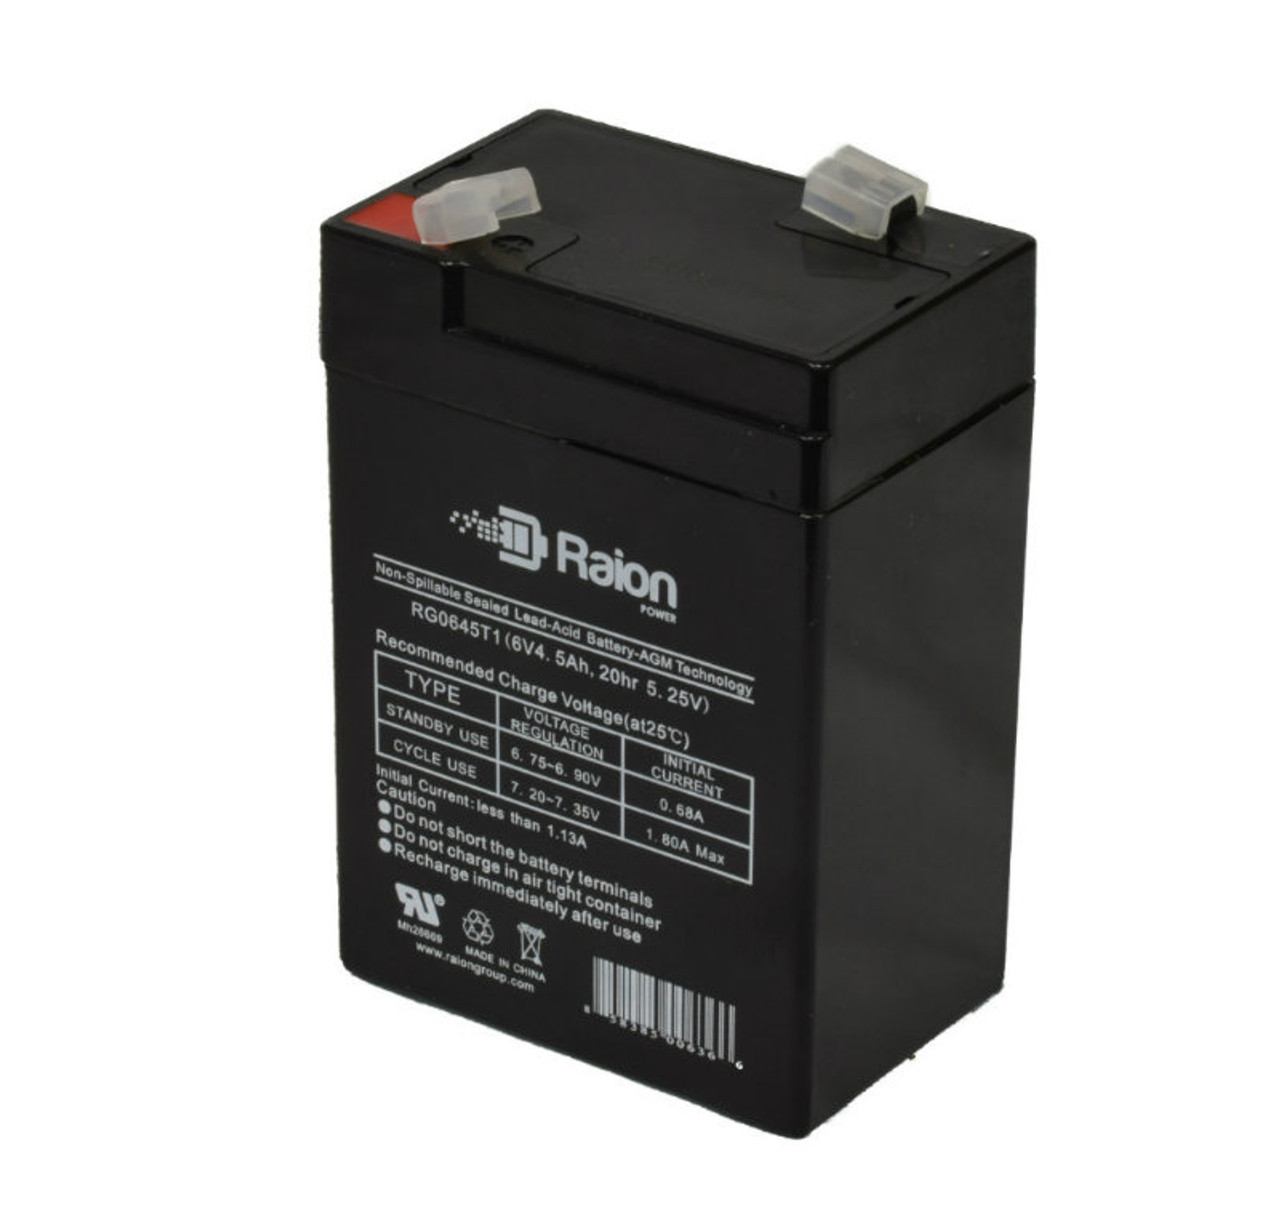 Raion Power RG0645T1 6V 4.5Ah Replacement Battery Cartridge for F&H UN5-6